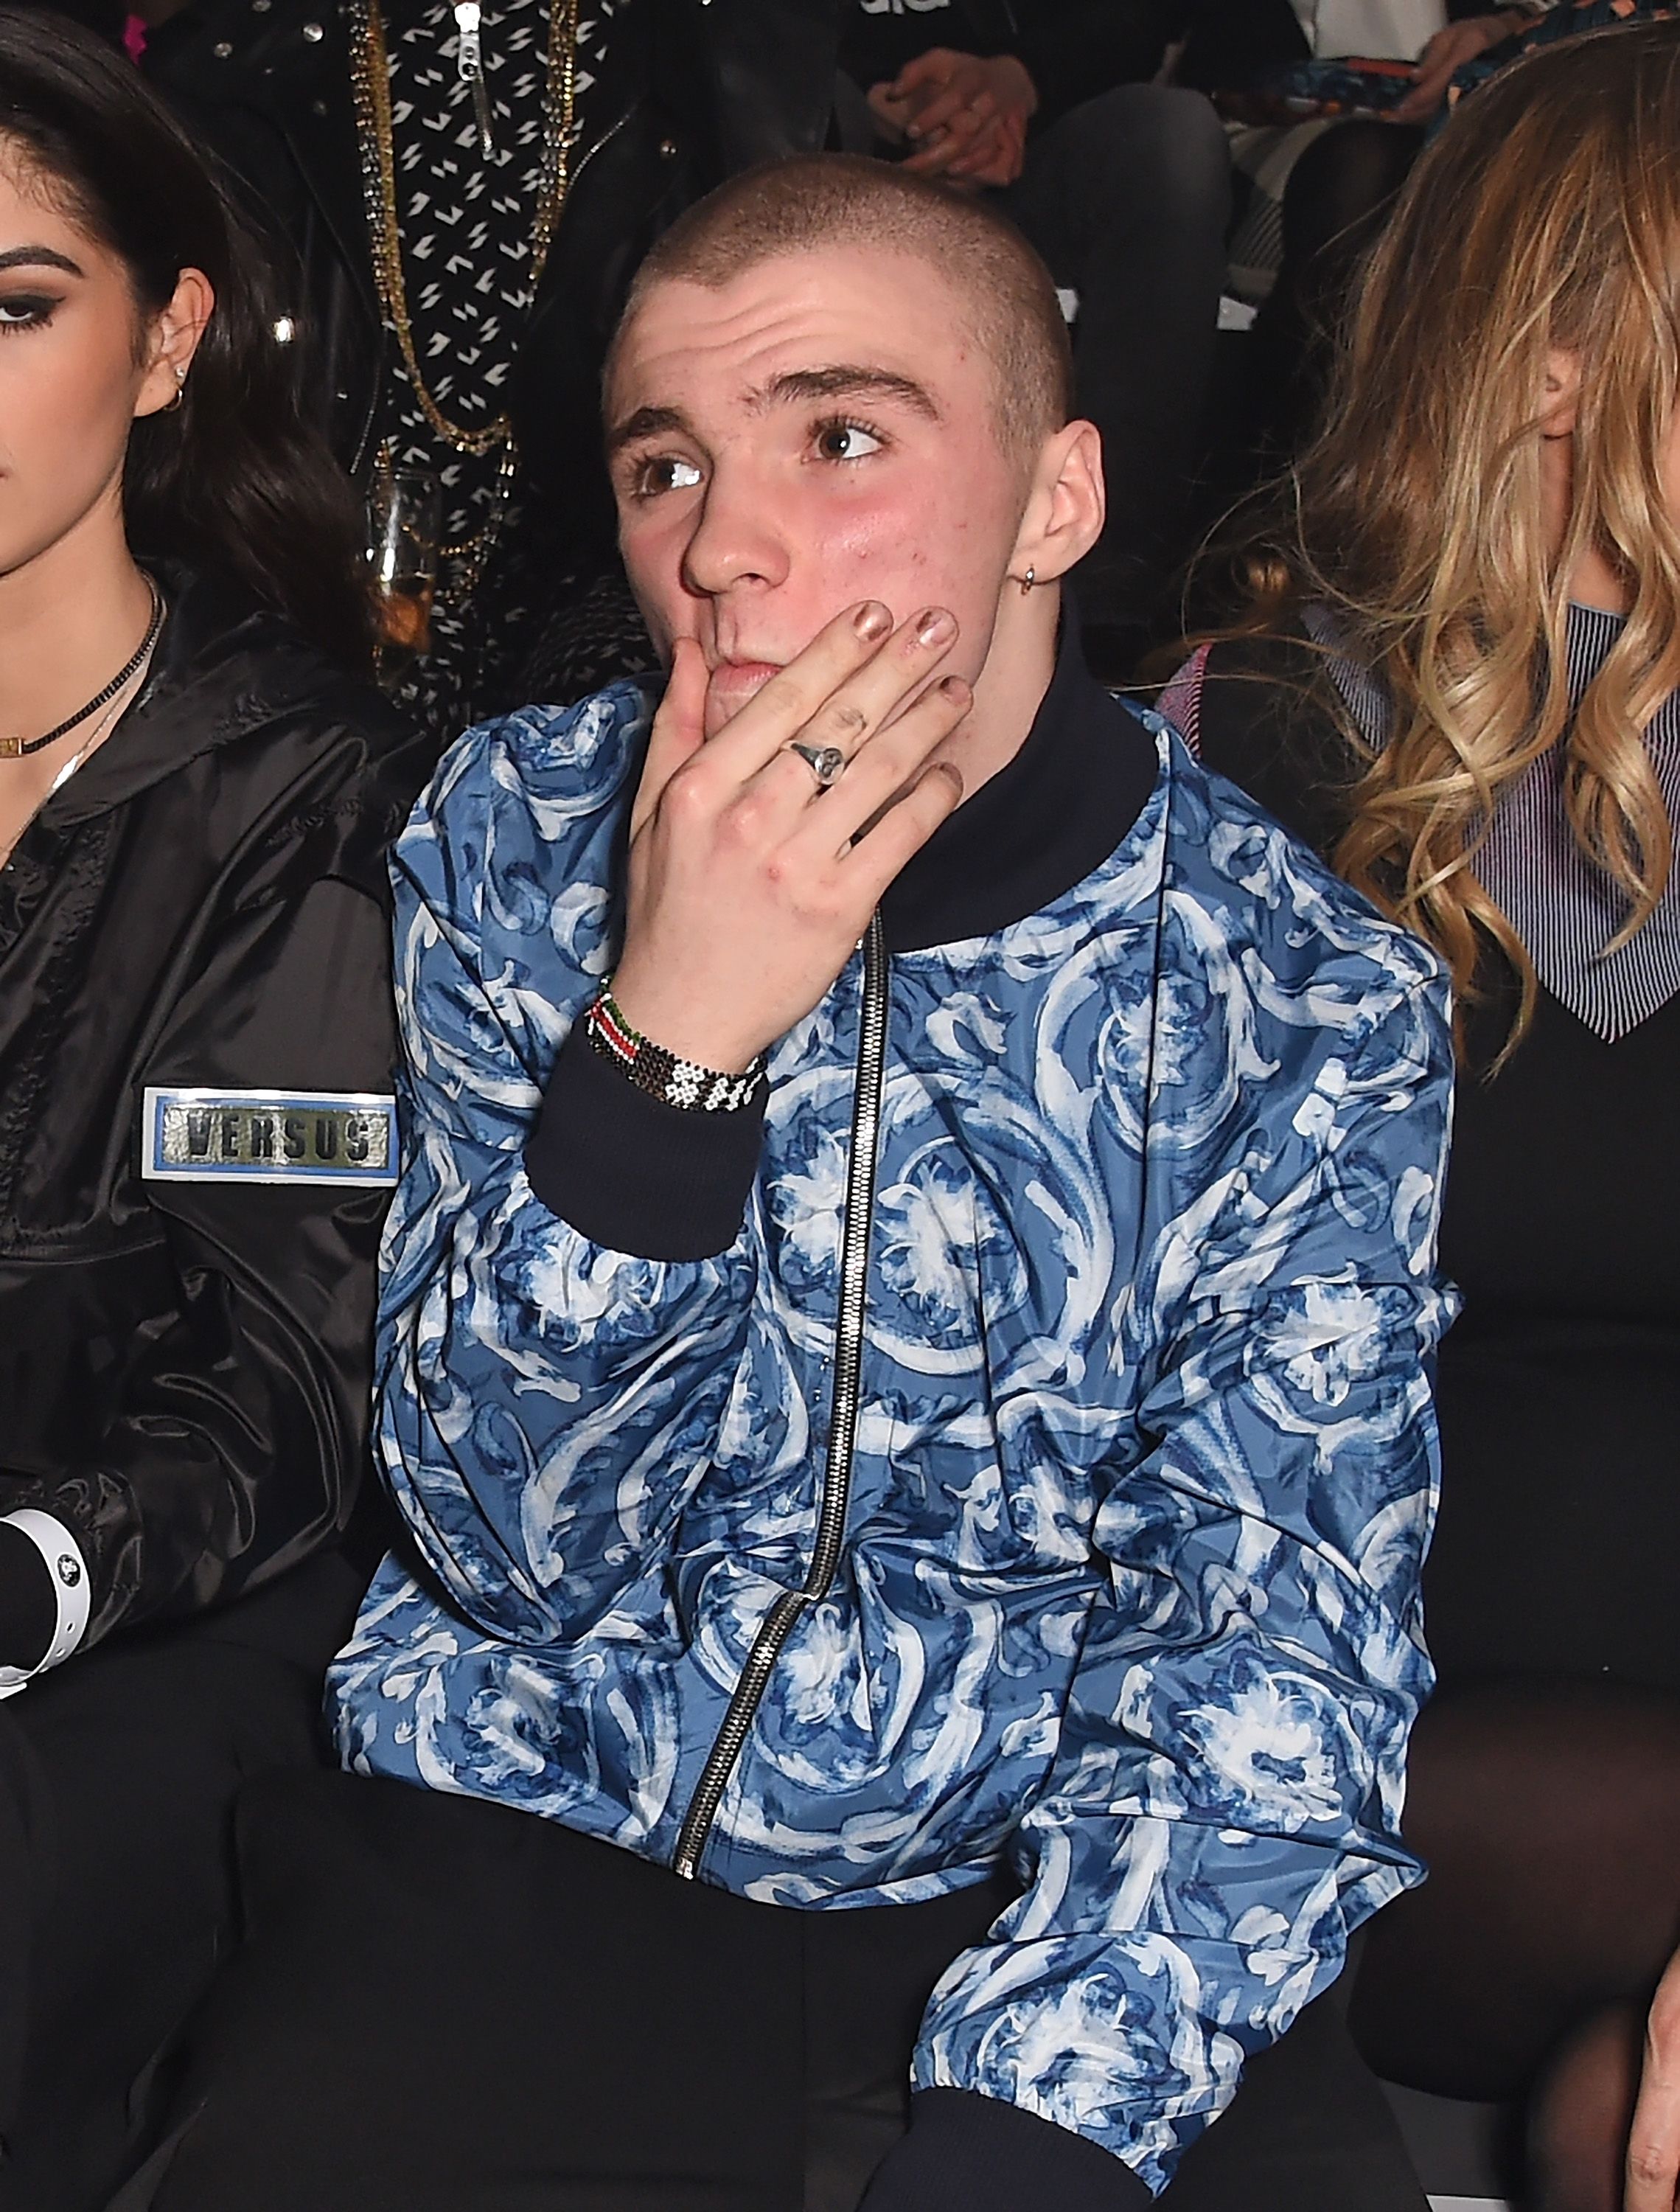 Rocco Ritchie at the London Fashion Week February 2017 in the UK | Source: Getty Images